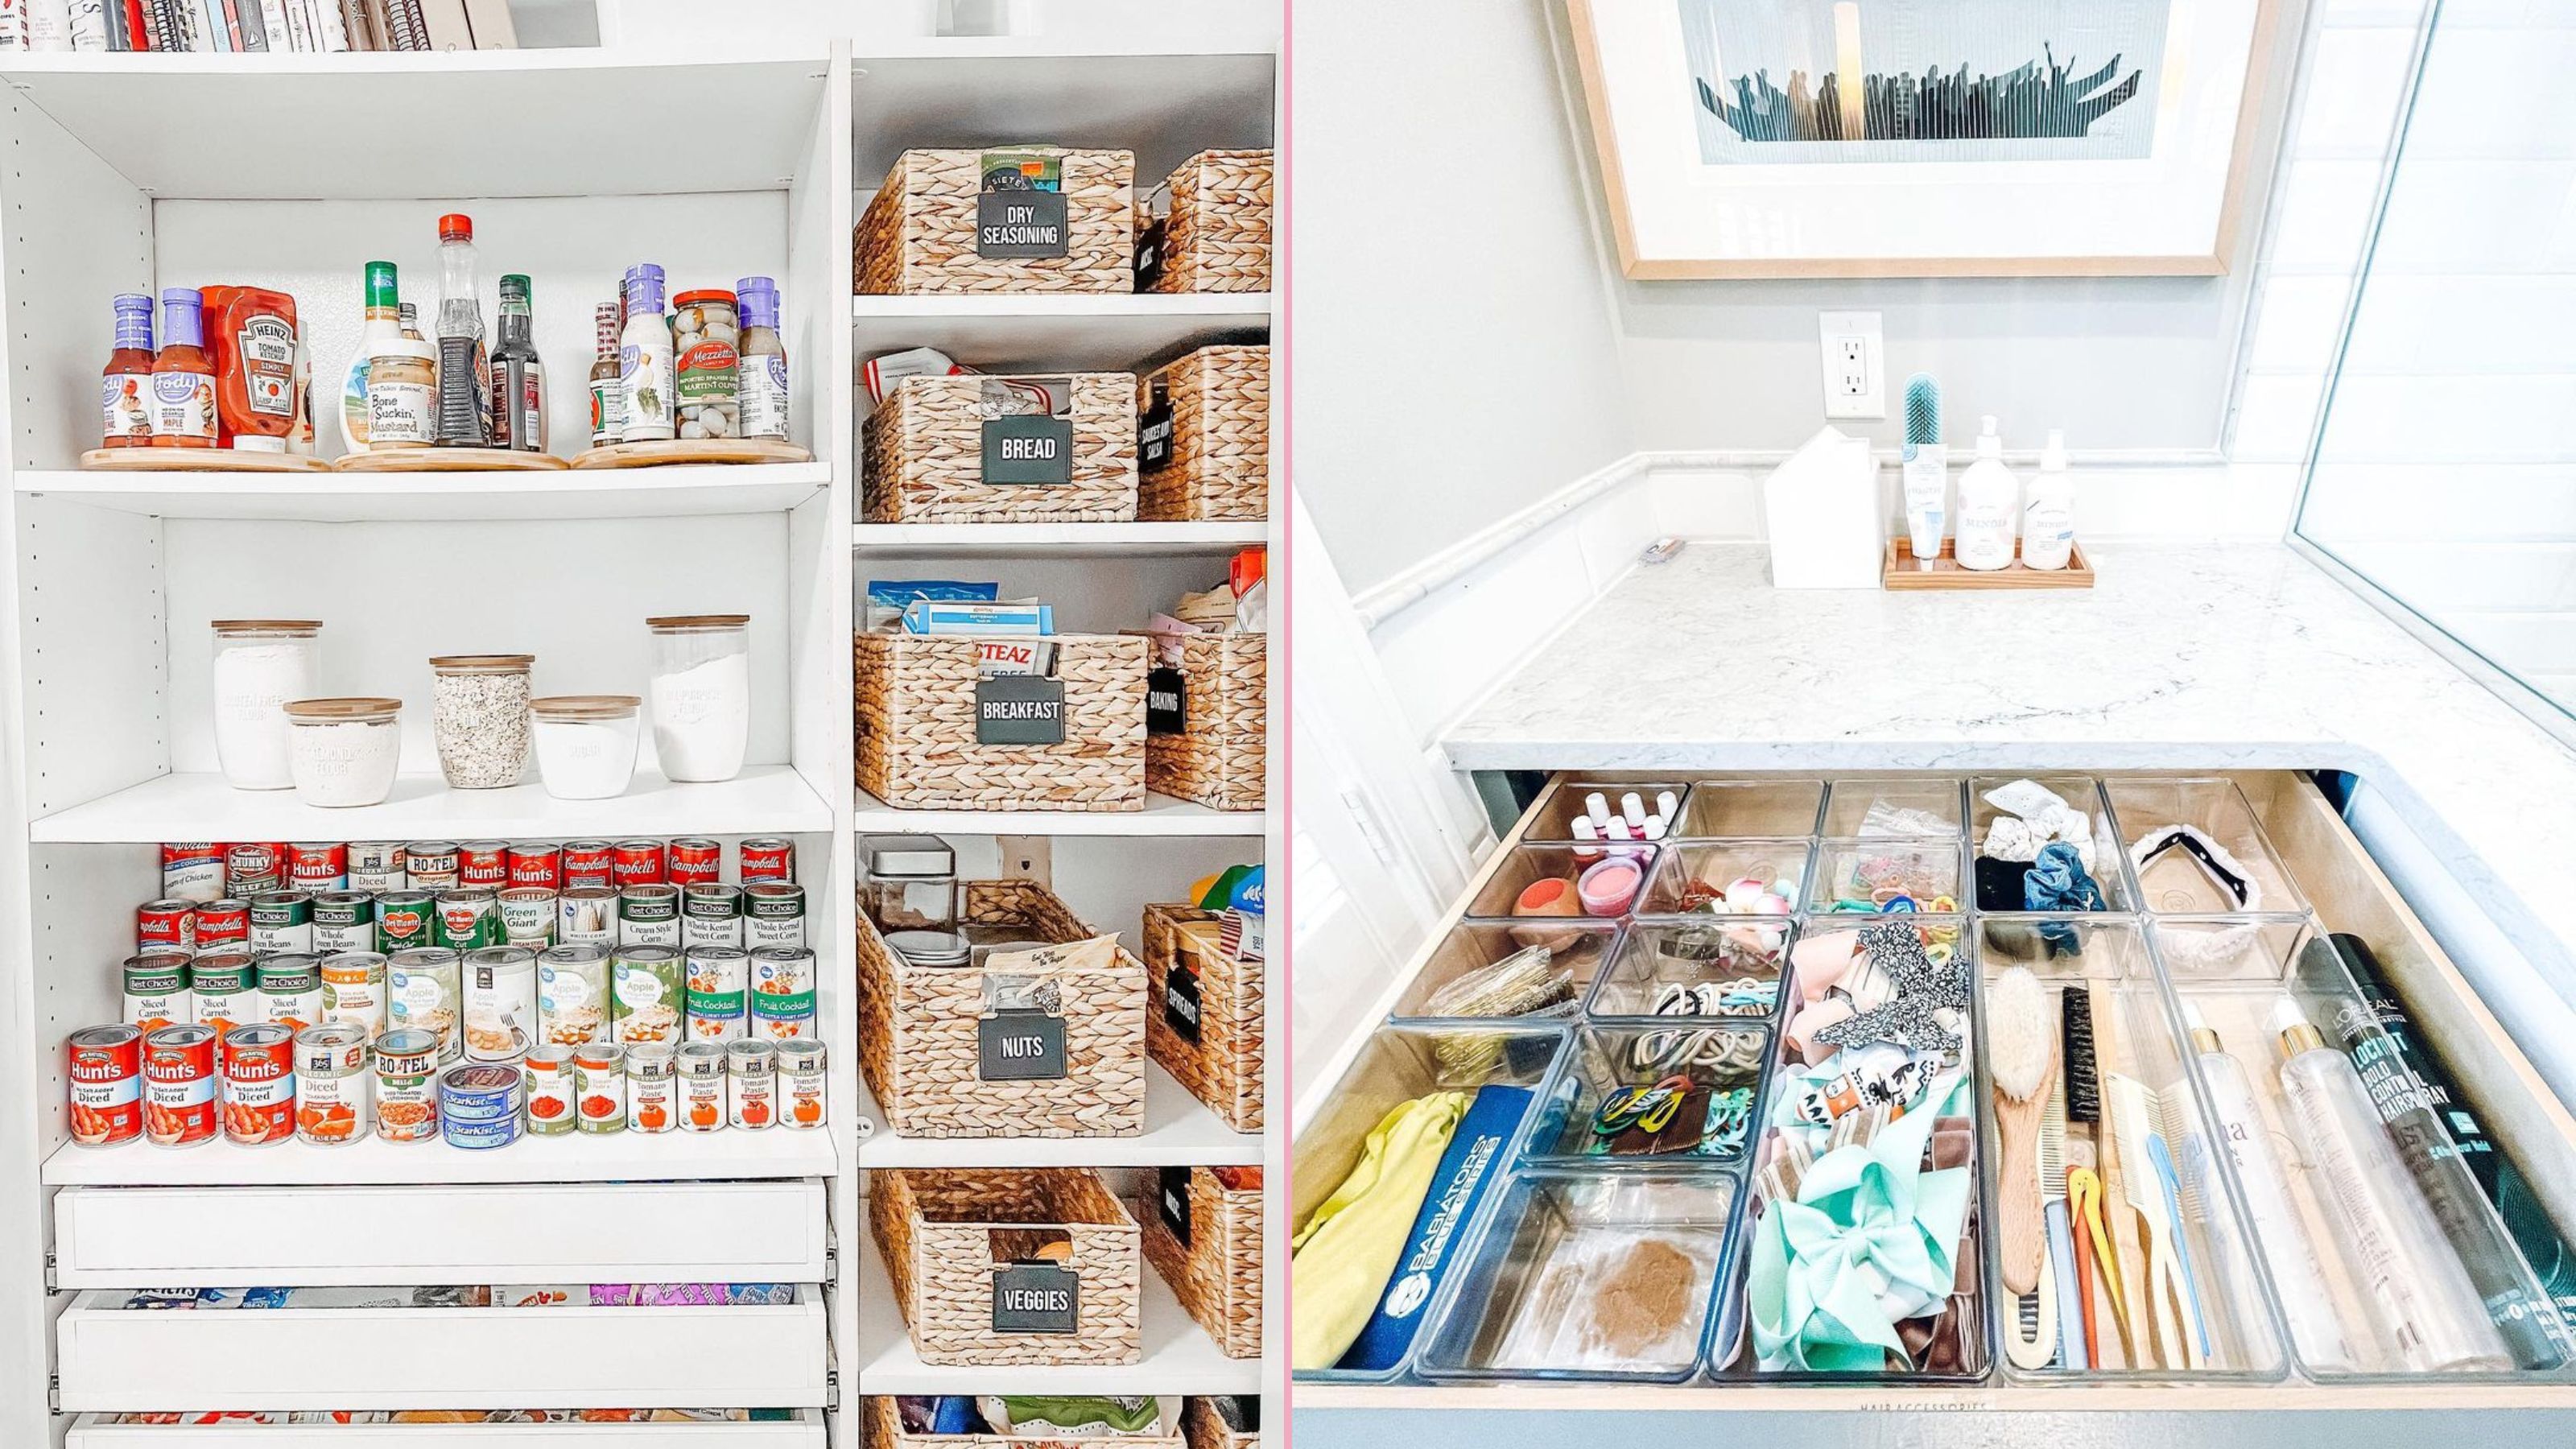 21 Small-Space Organizing Ideas to Get the Most Out of Every Room